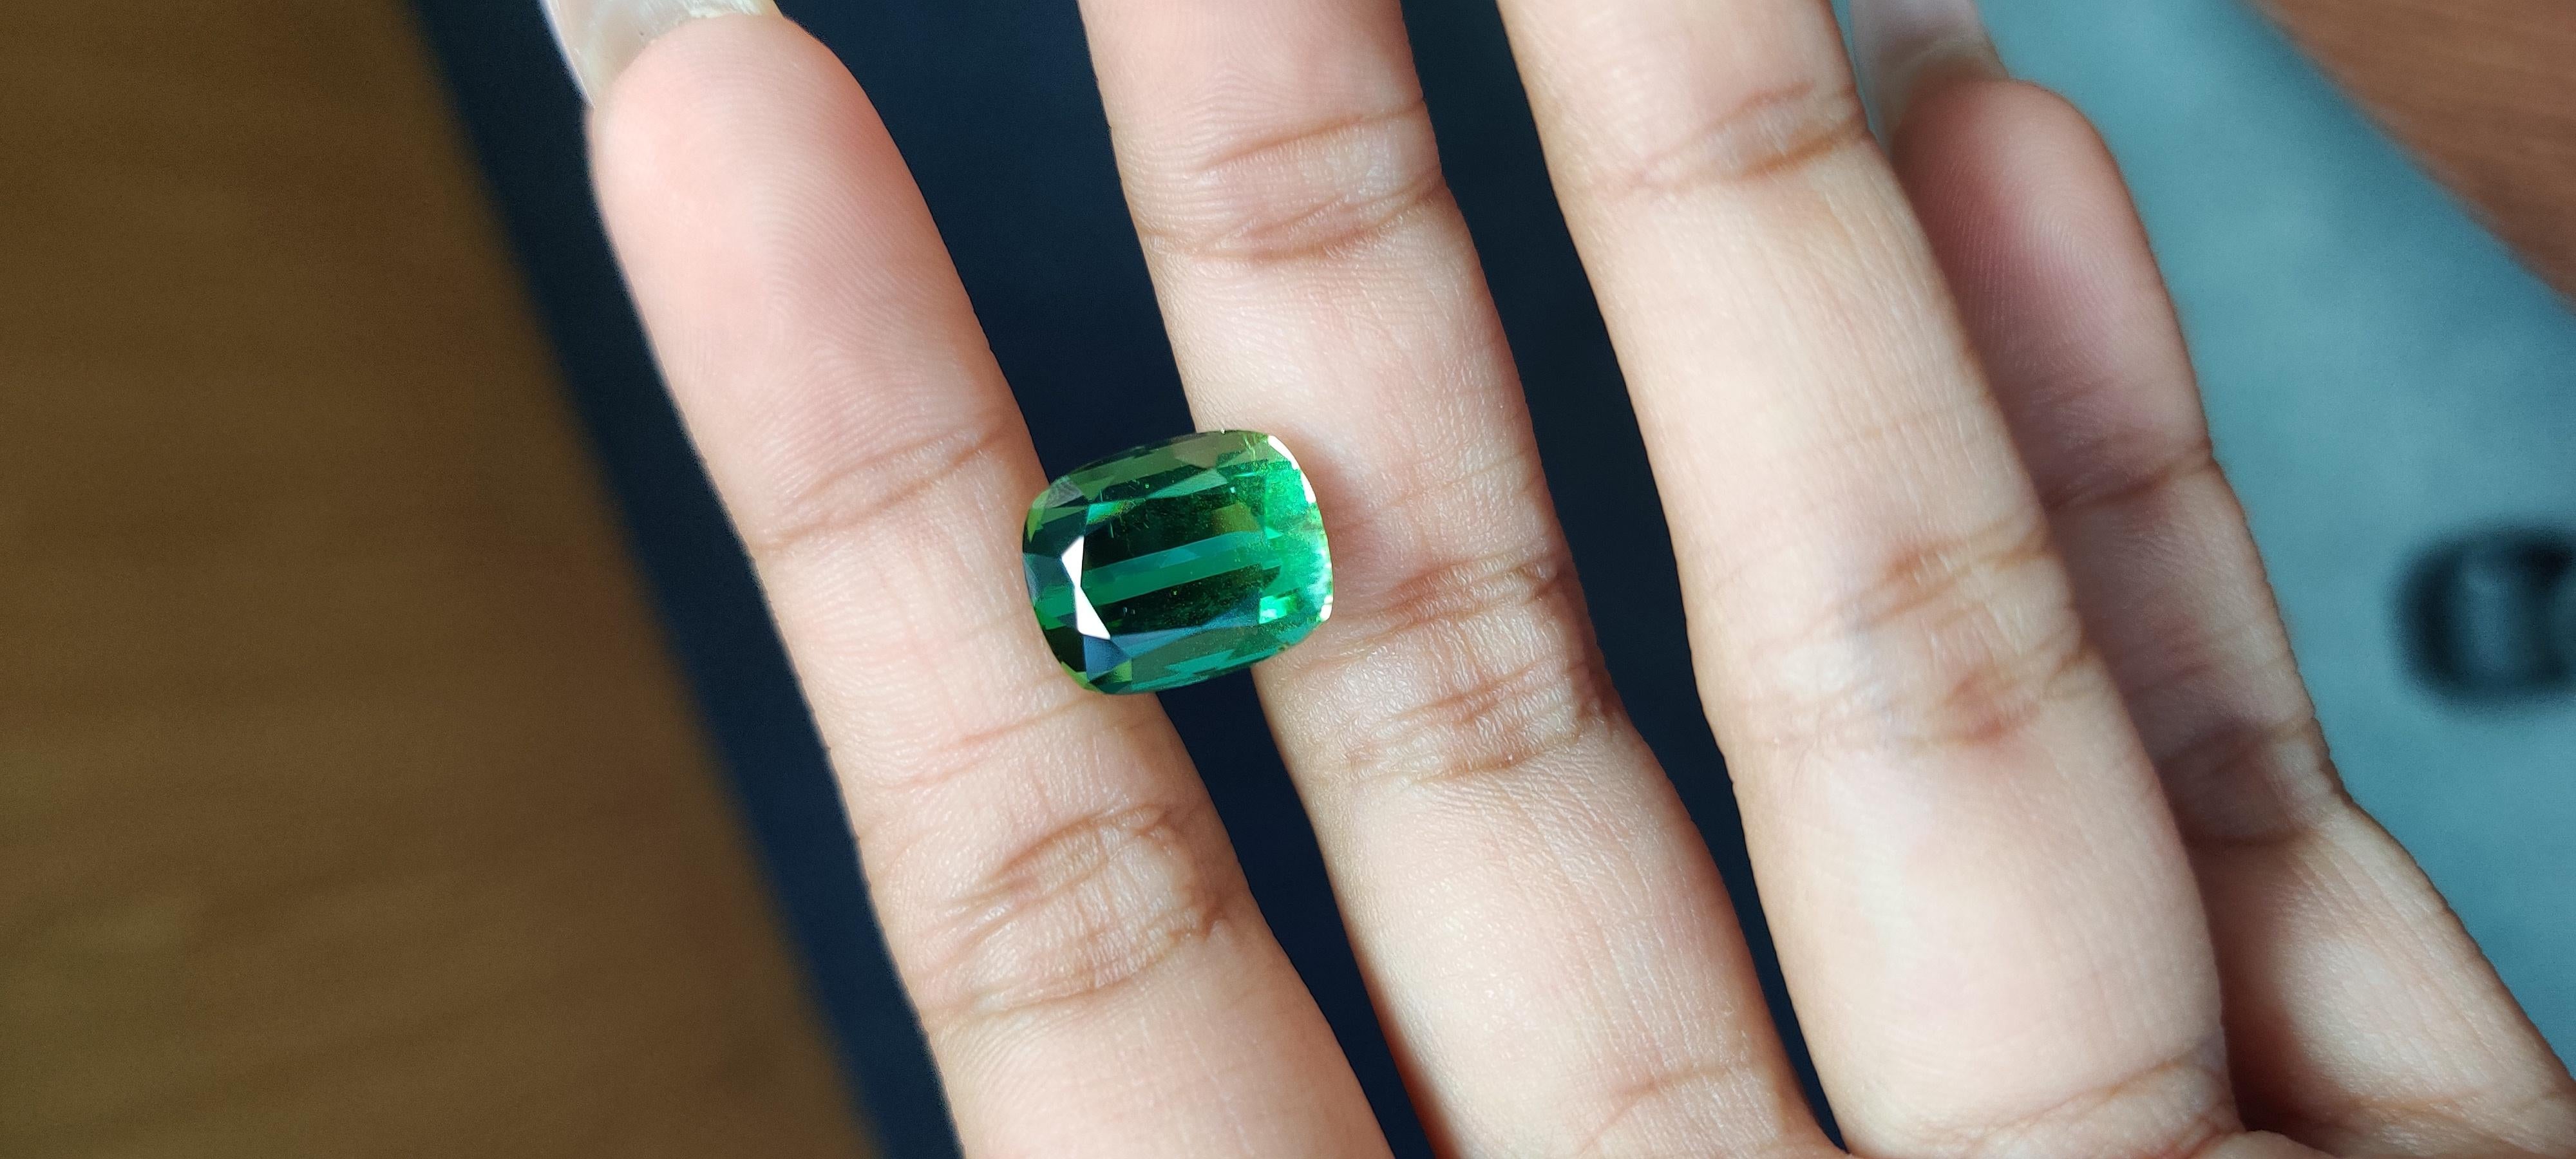 A massive, mesmerizing 8.88 Carat Tourmaline stone that is vivid green in color. It is completely natural and of good quality. The tourmaline piece is cut into perfection in a cushion-cut shape.

The orange tourmaline has not undergone any form of